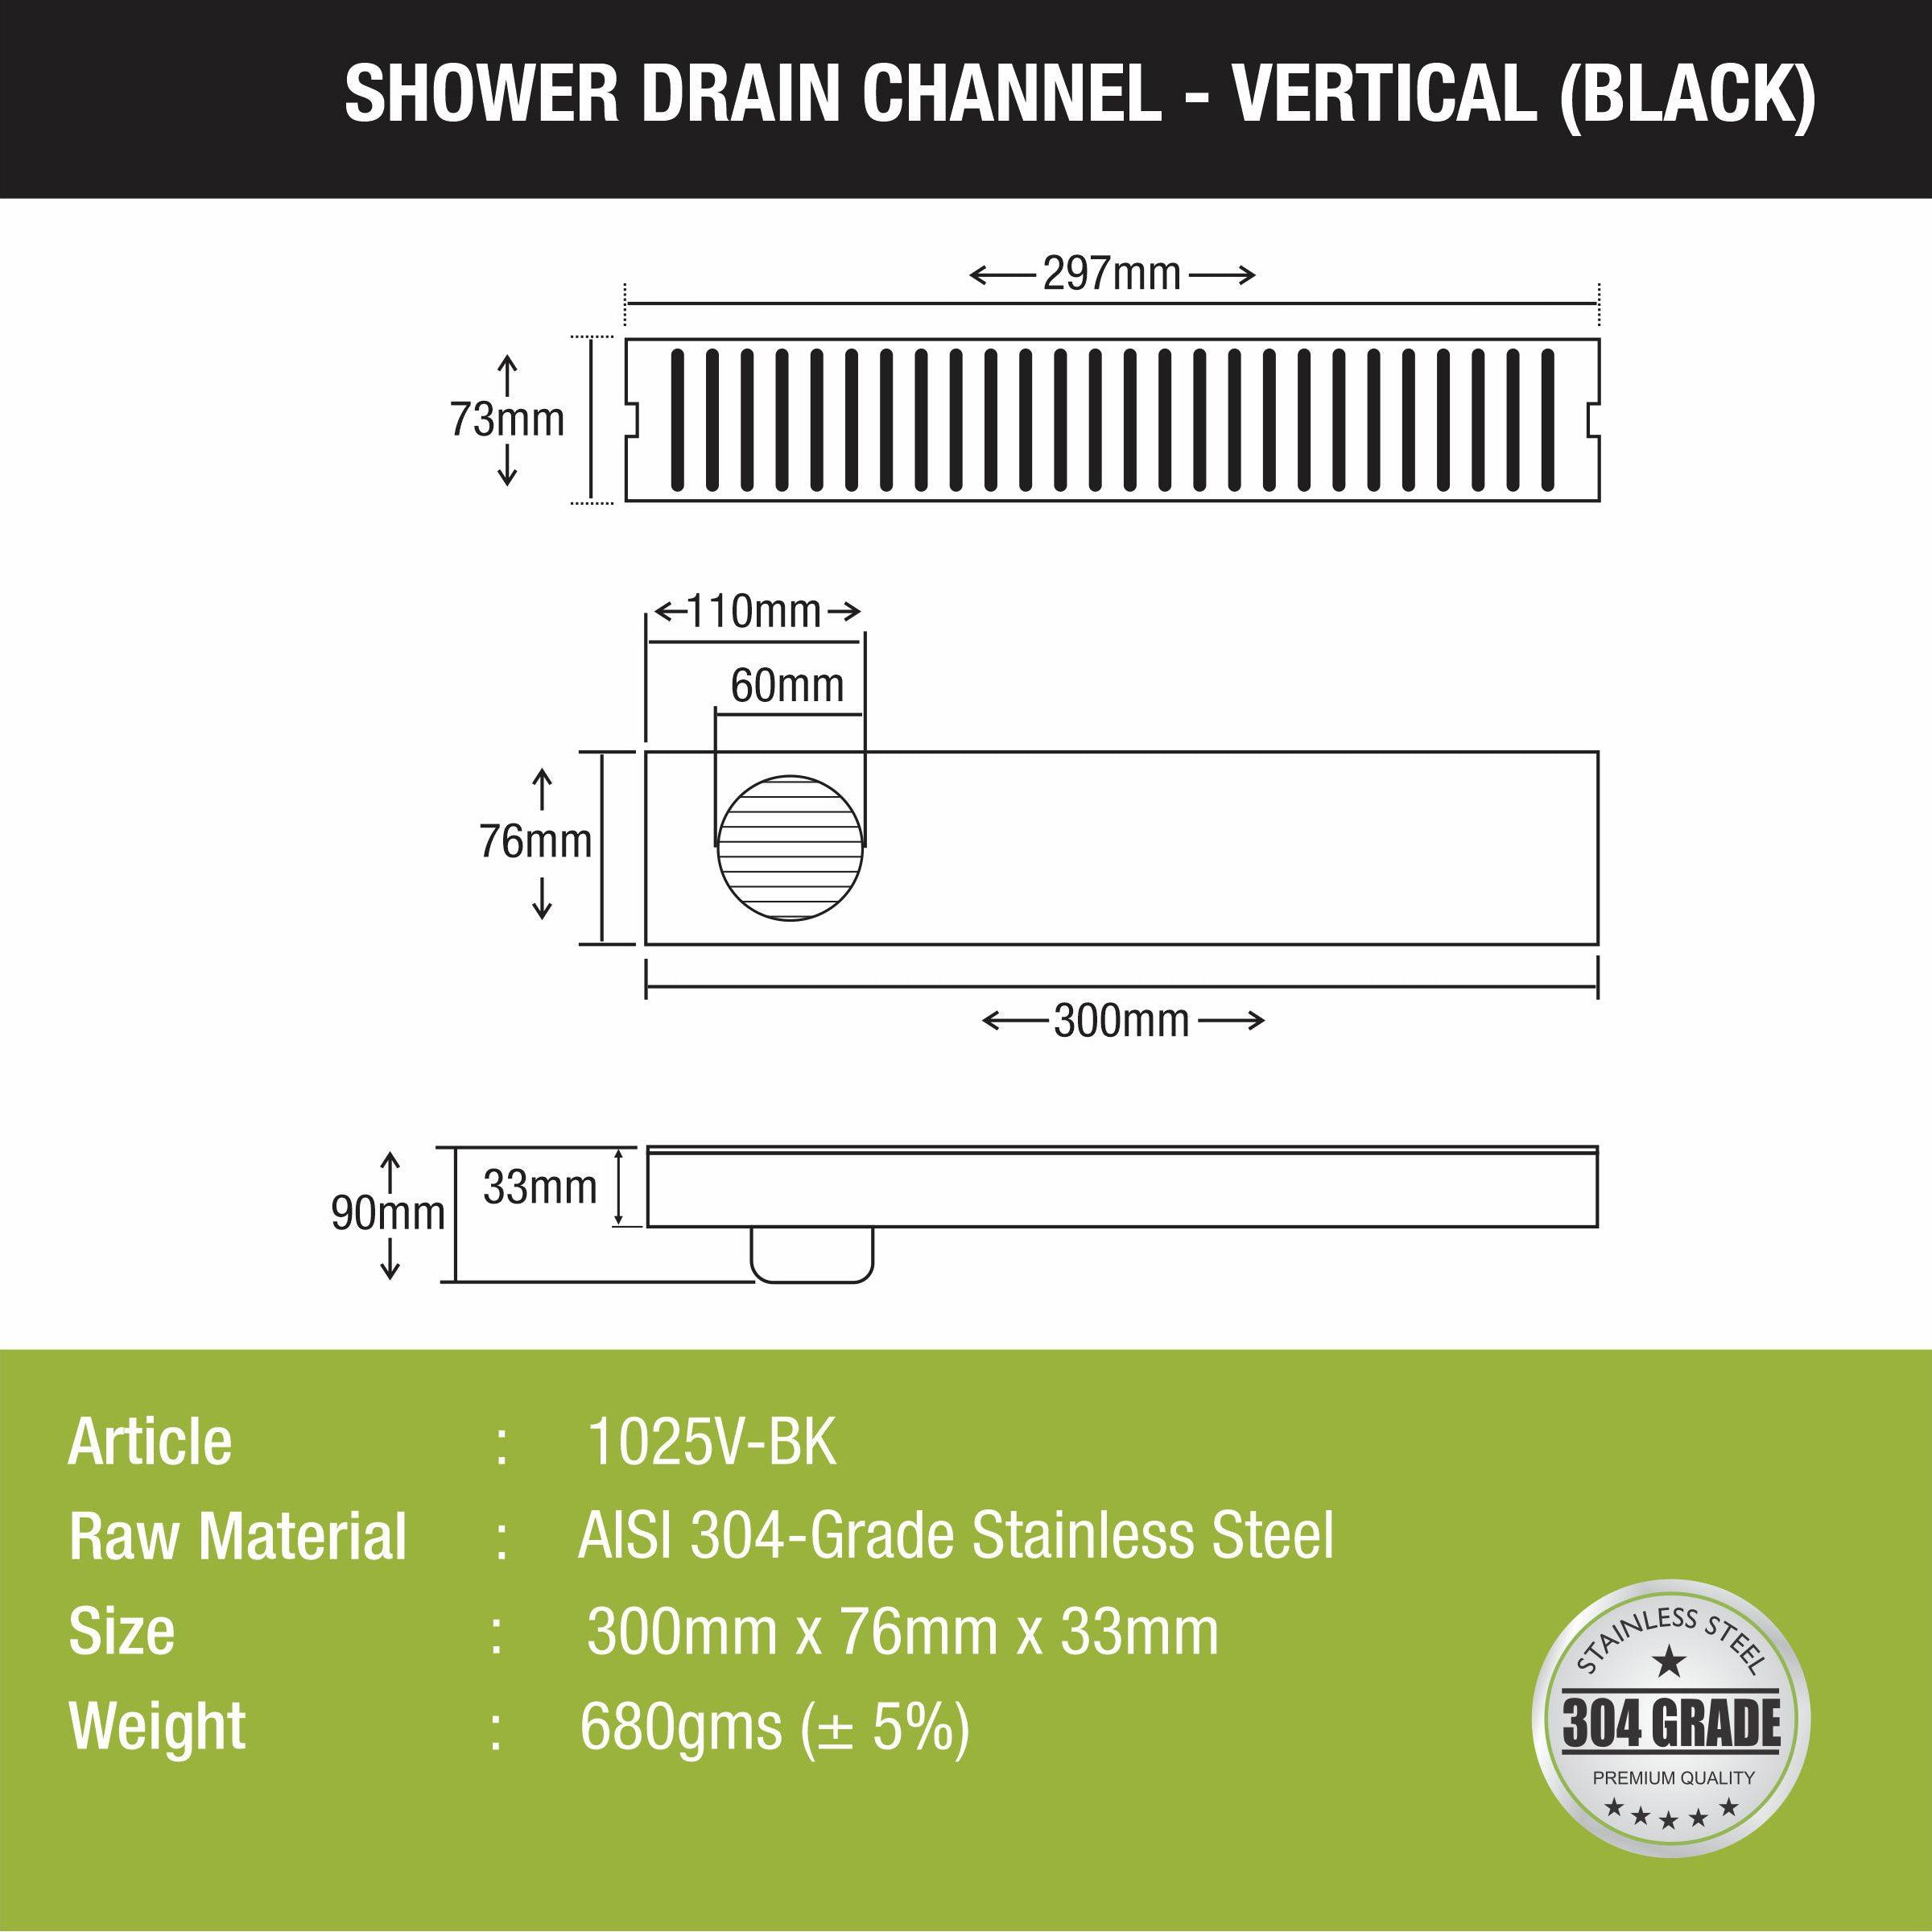 Vertical Shower Drain Channel - Black (12 x 3 Inches) size and measurement